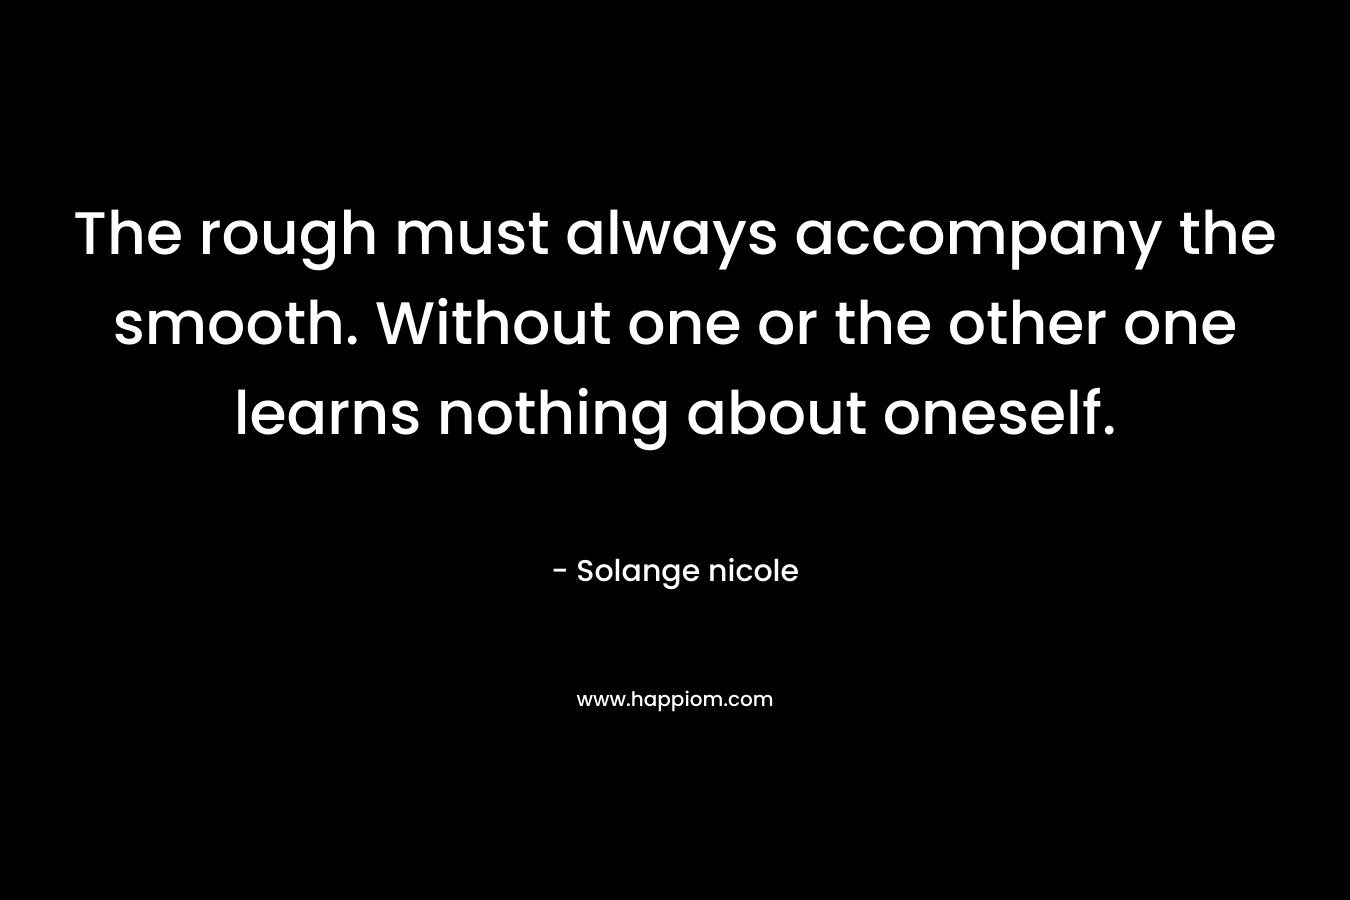 The rough must always accompany the smooth. Without one or the other one learns nothing about oneself. – Solange nicole